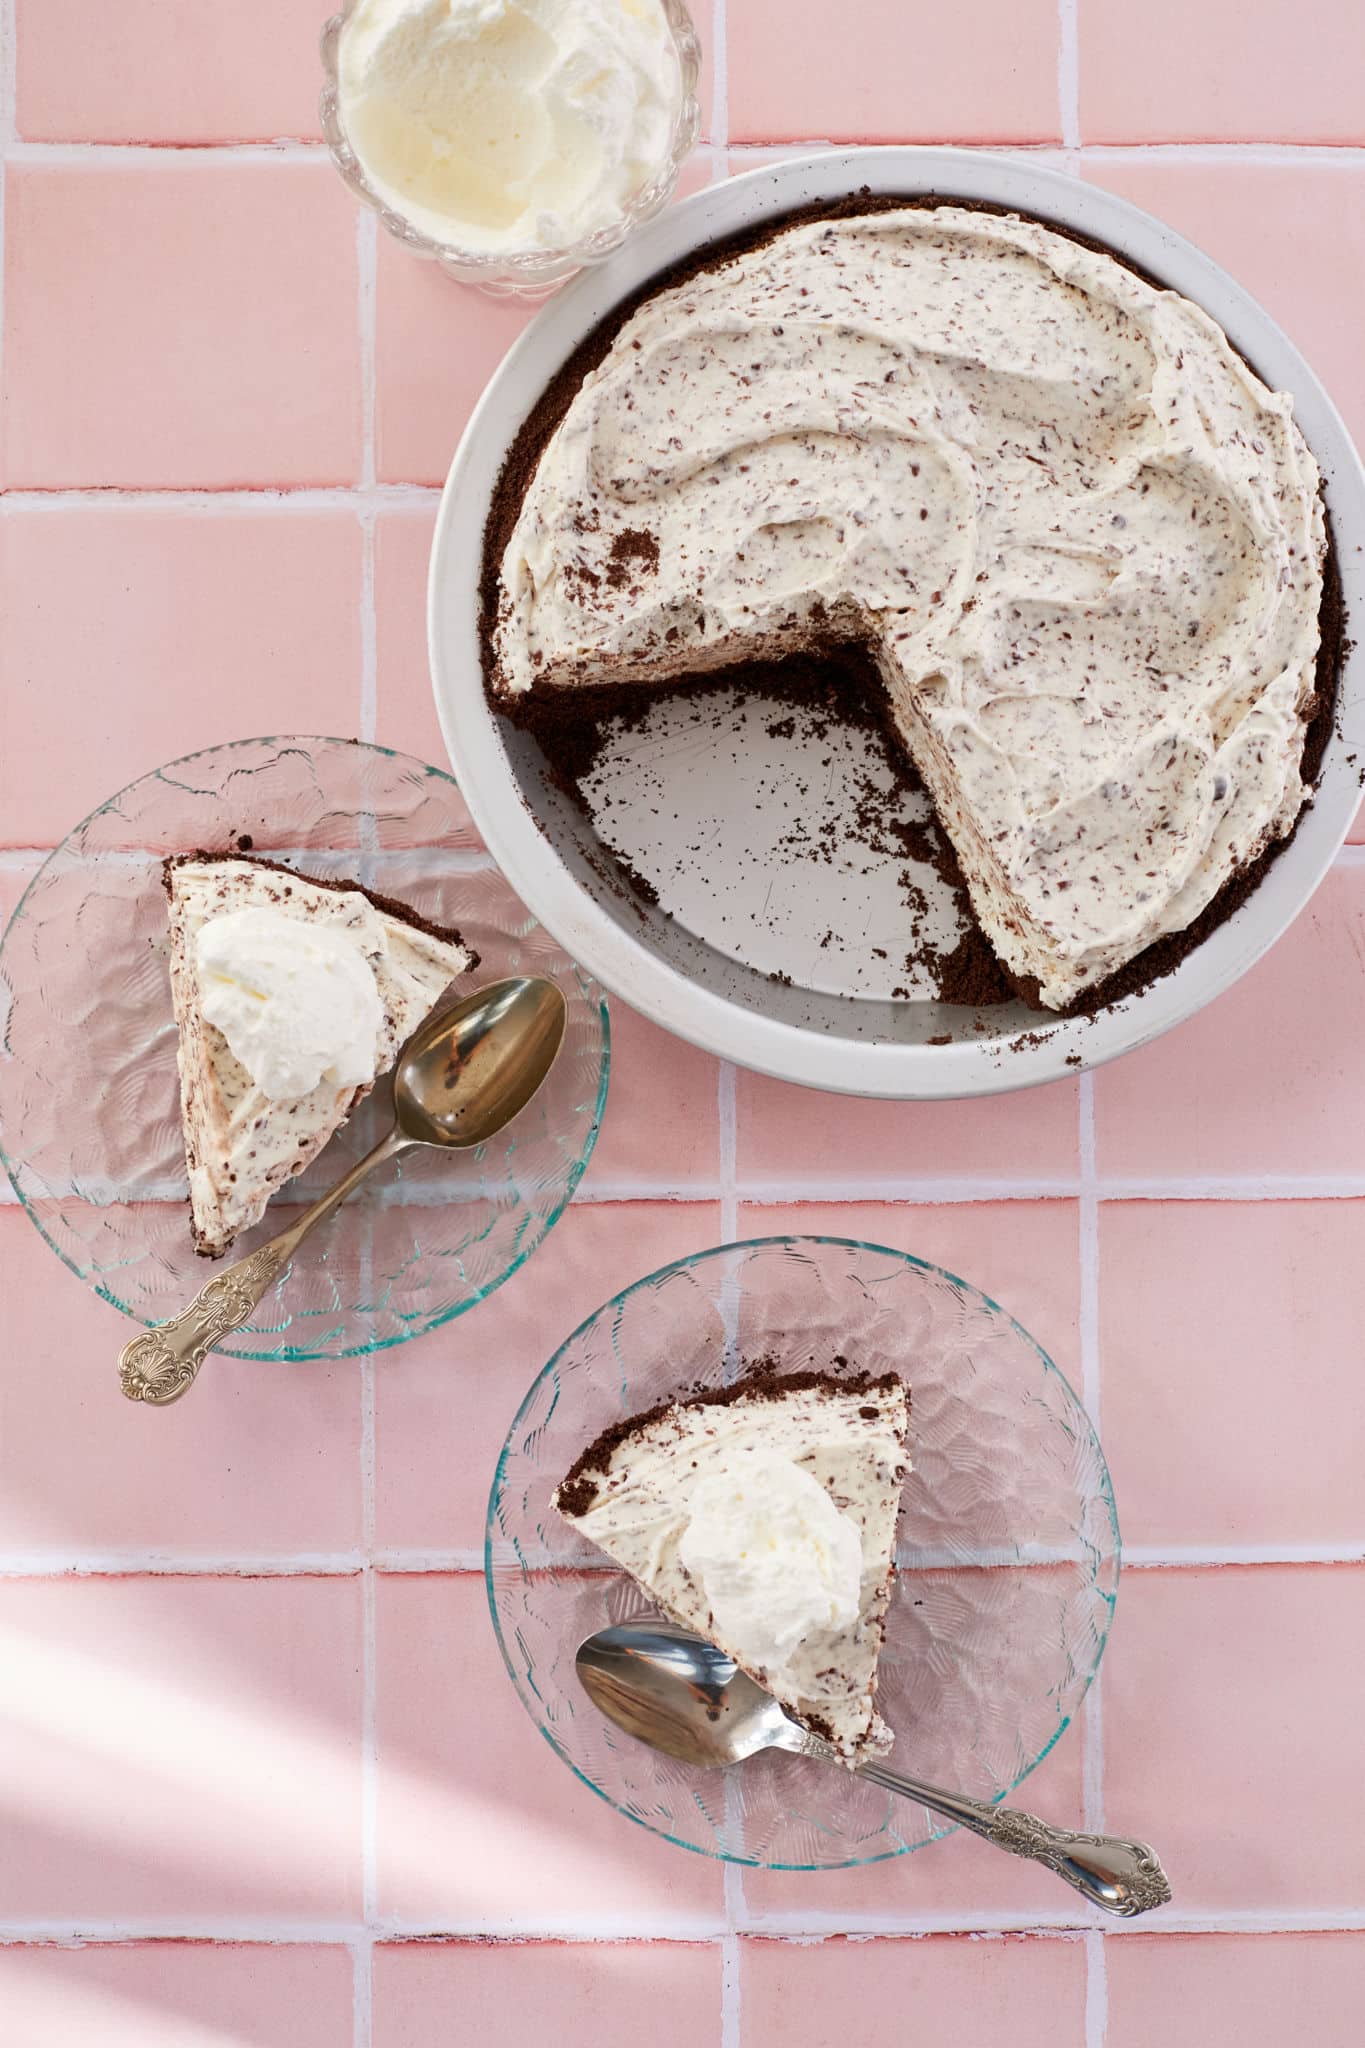 Mint Ice Cream Pie with slices removed.